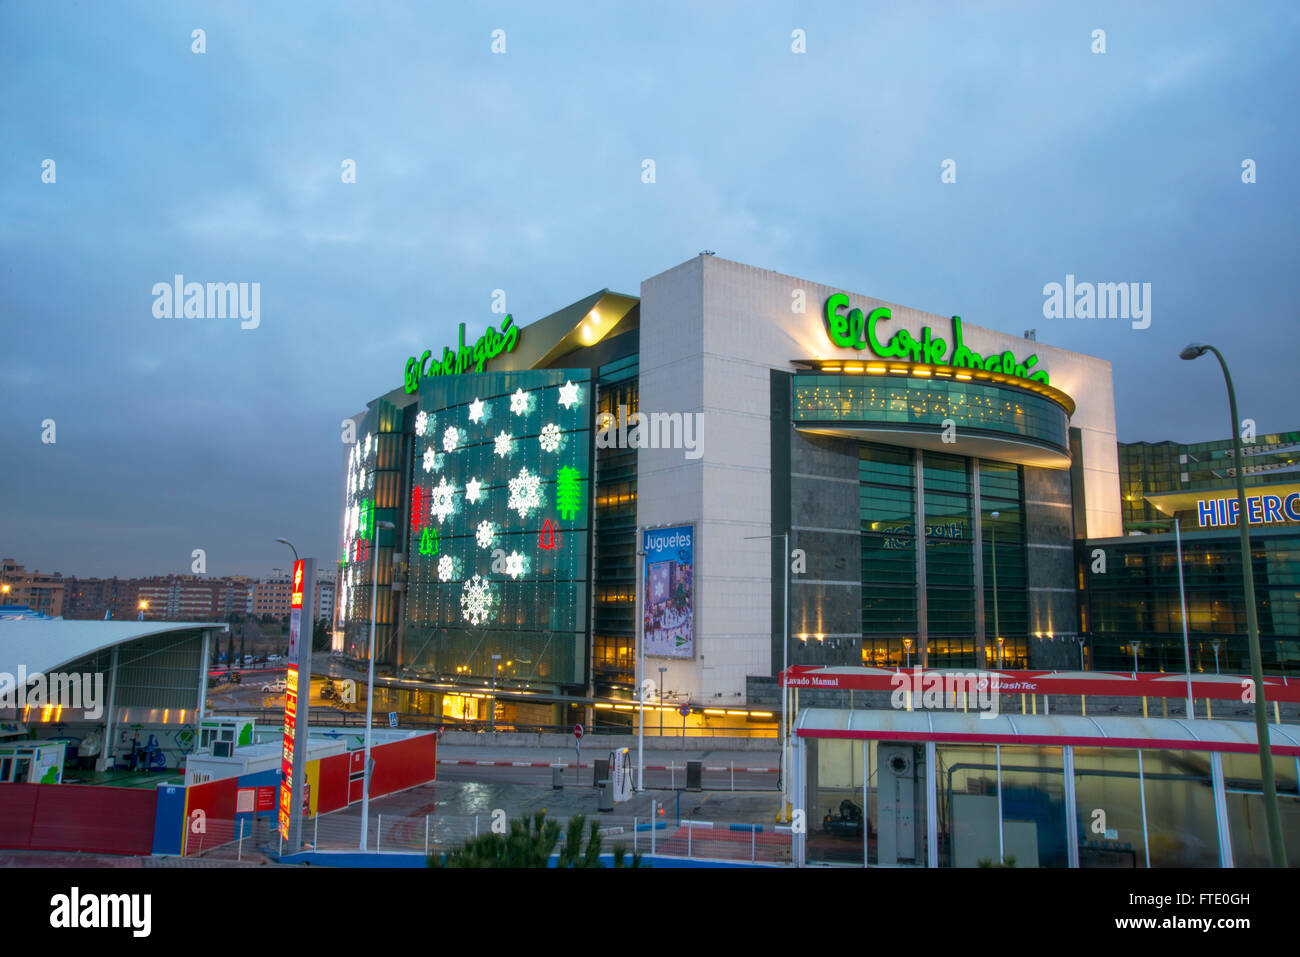 Facade of El Corte Ingles shopping center at Christmas time, night view. Sanchinarro, Madrid, Spain. Stock Photo